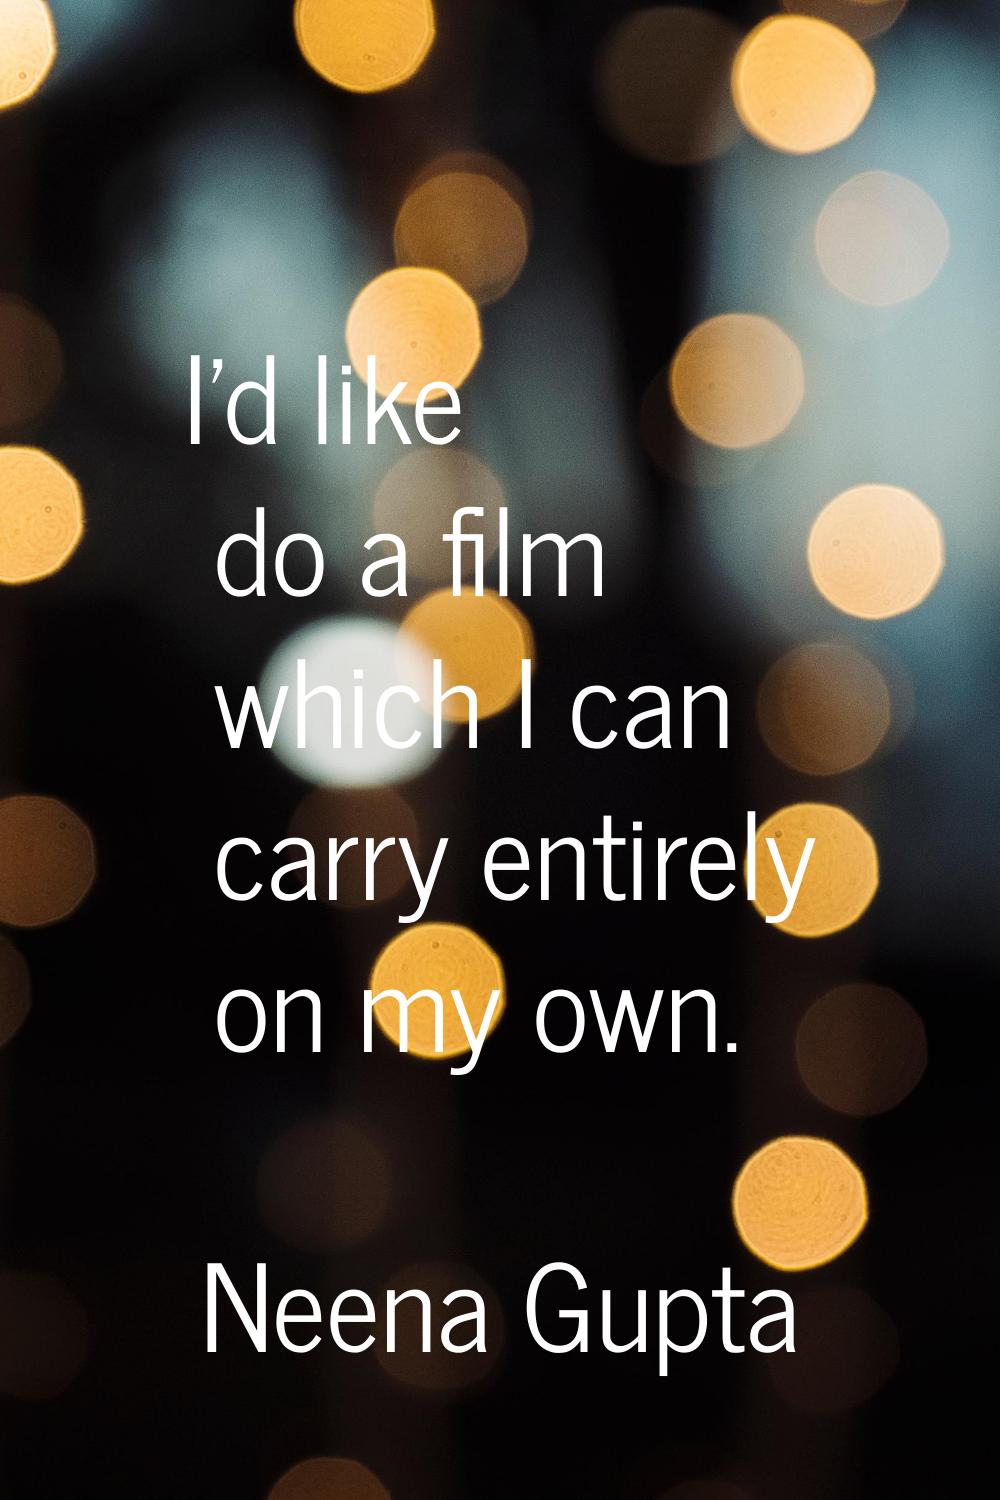 I'd like do a film which I can carry entirely on my own.